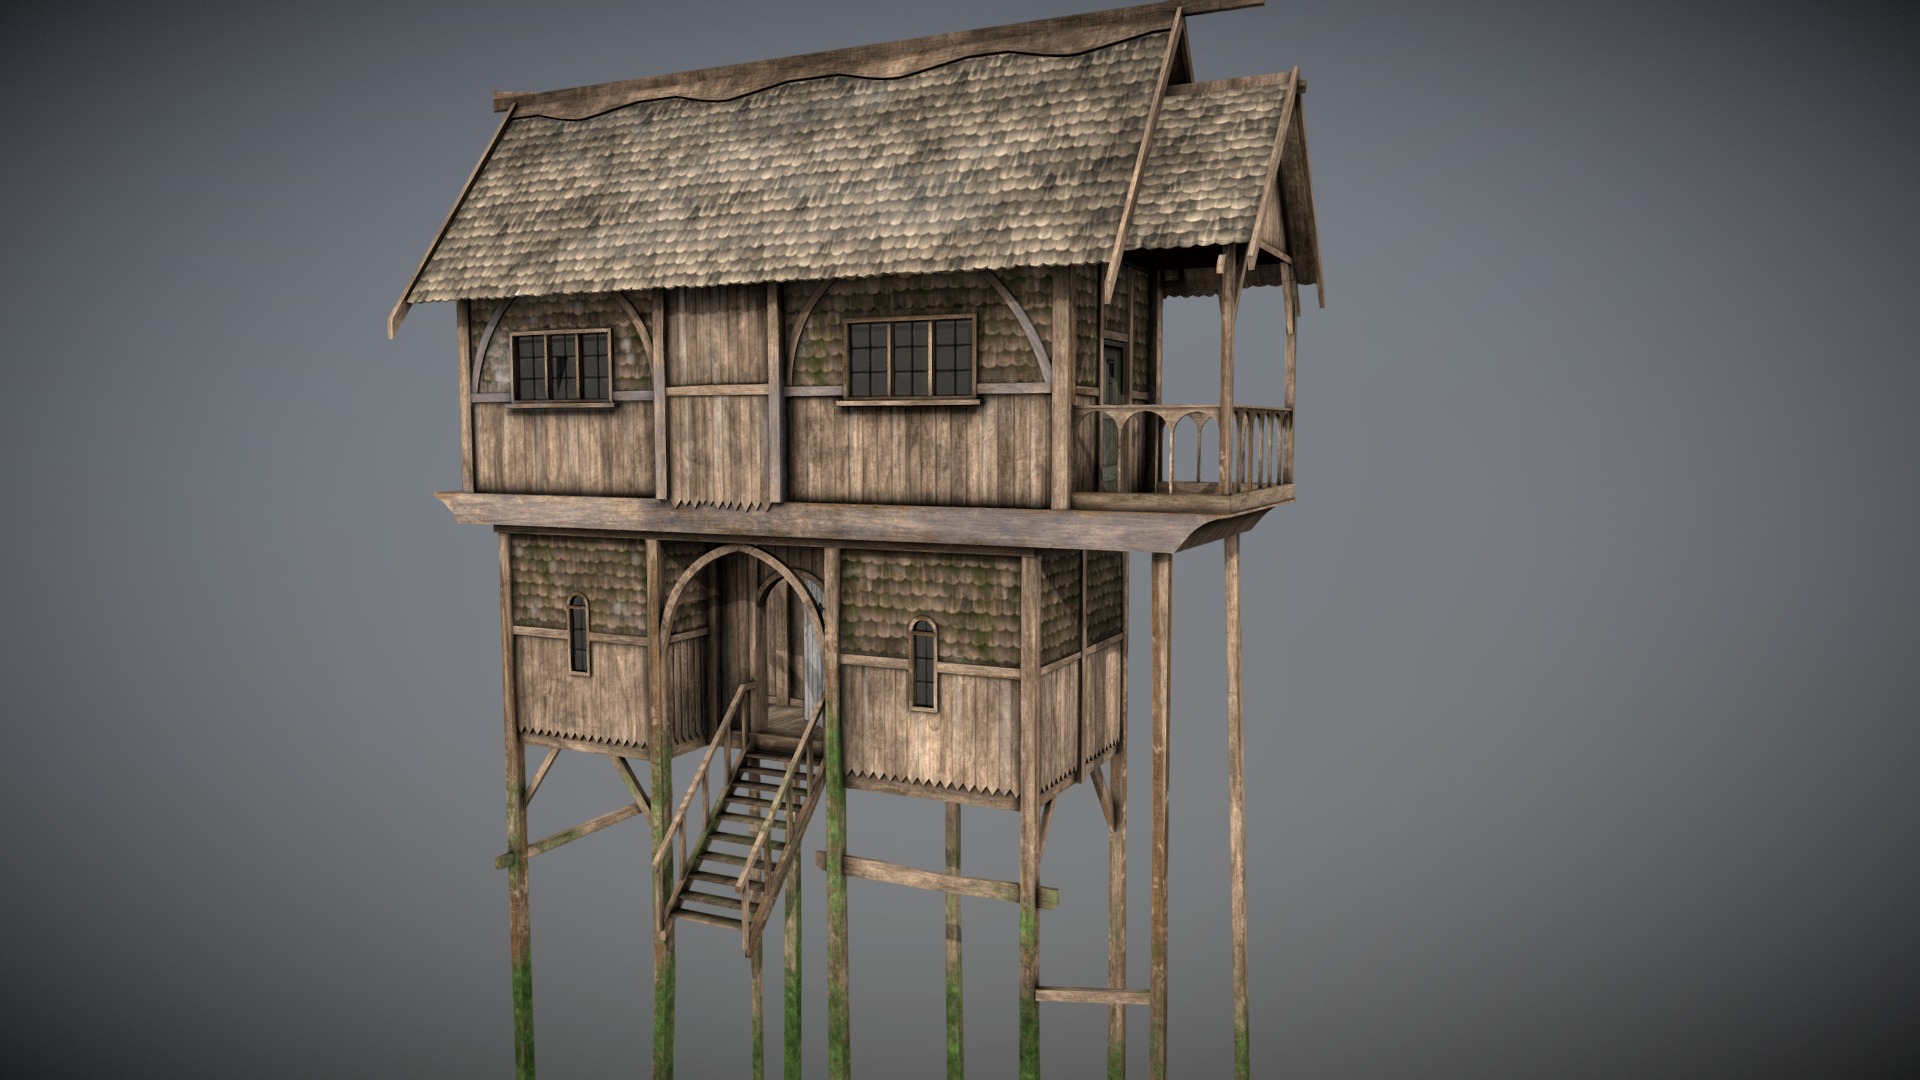 3D model Medieval Lake Village – House 3 with interiors - This is a 3D model of the Medieval Lake Village - House 3 with interiors. The 3D model is about a wooden house with a ladder.